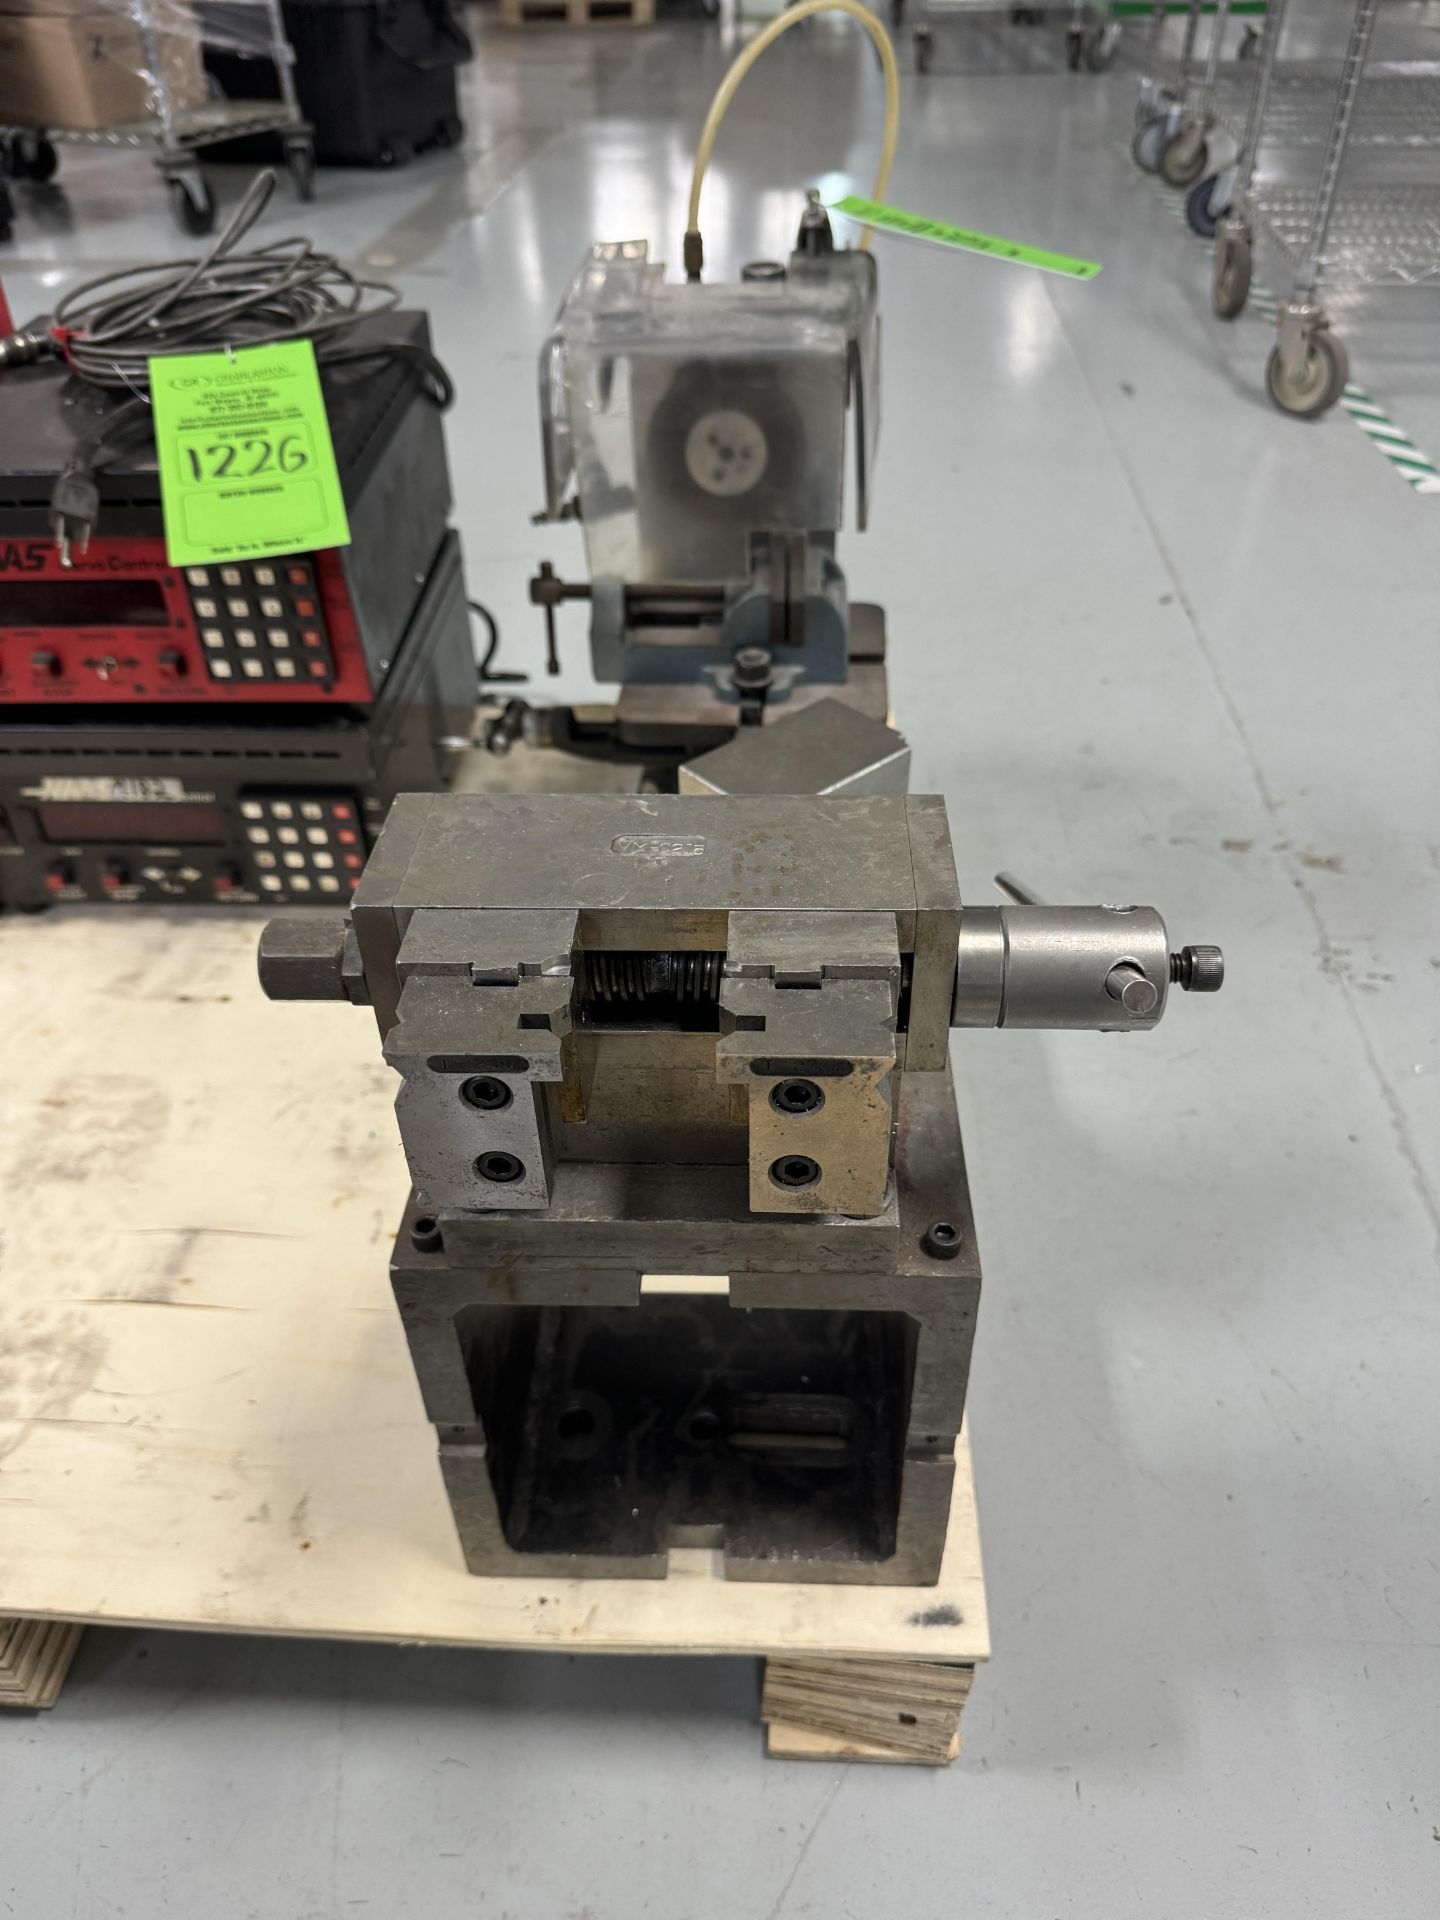 CUSTOM GRIDNING FIXTURE WITH VISE AND (2) CLAMPING FIXTURES